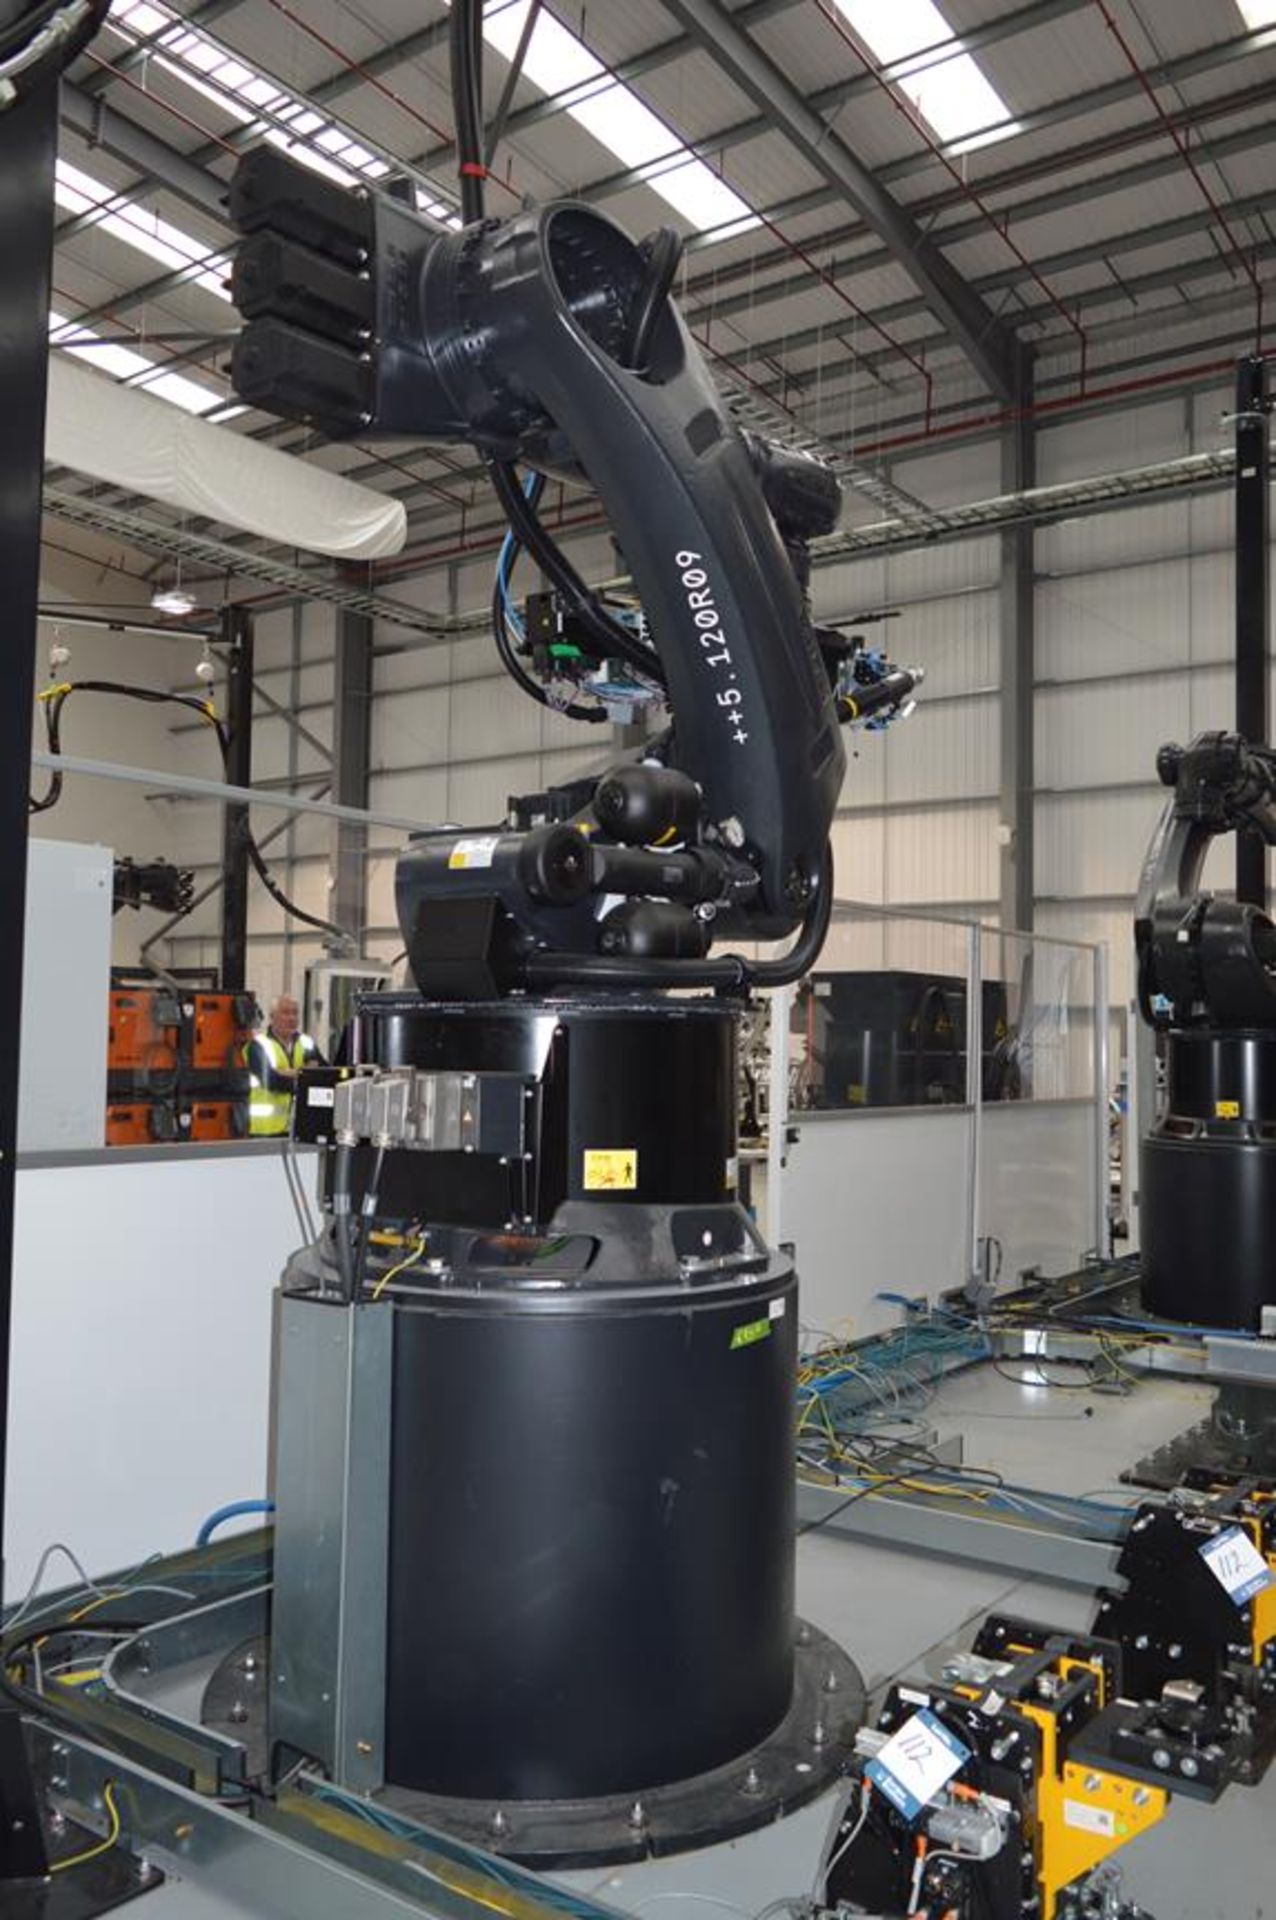 Kuka, KR280/R3080 FLR six axis robot on extended pedestal, Serial No. 4380882 (DOM: 2021) and KR